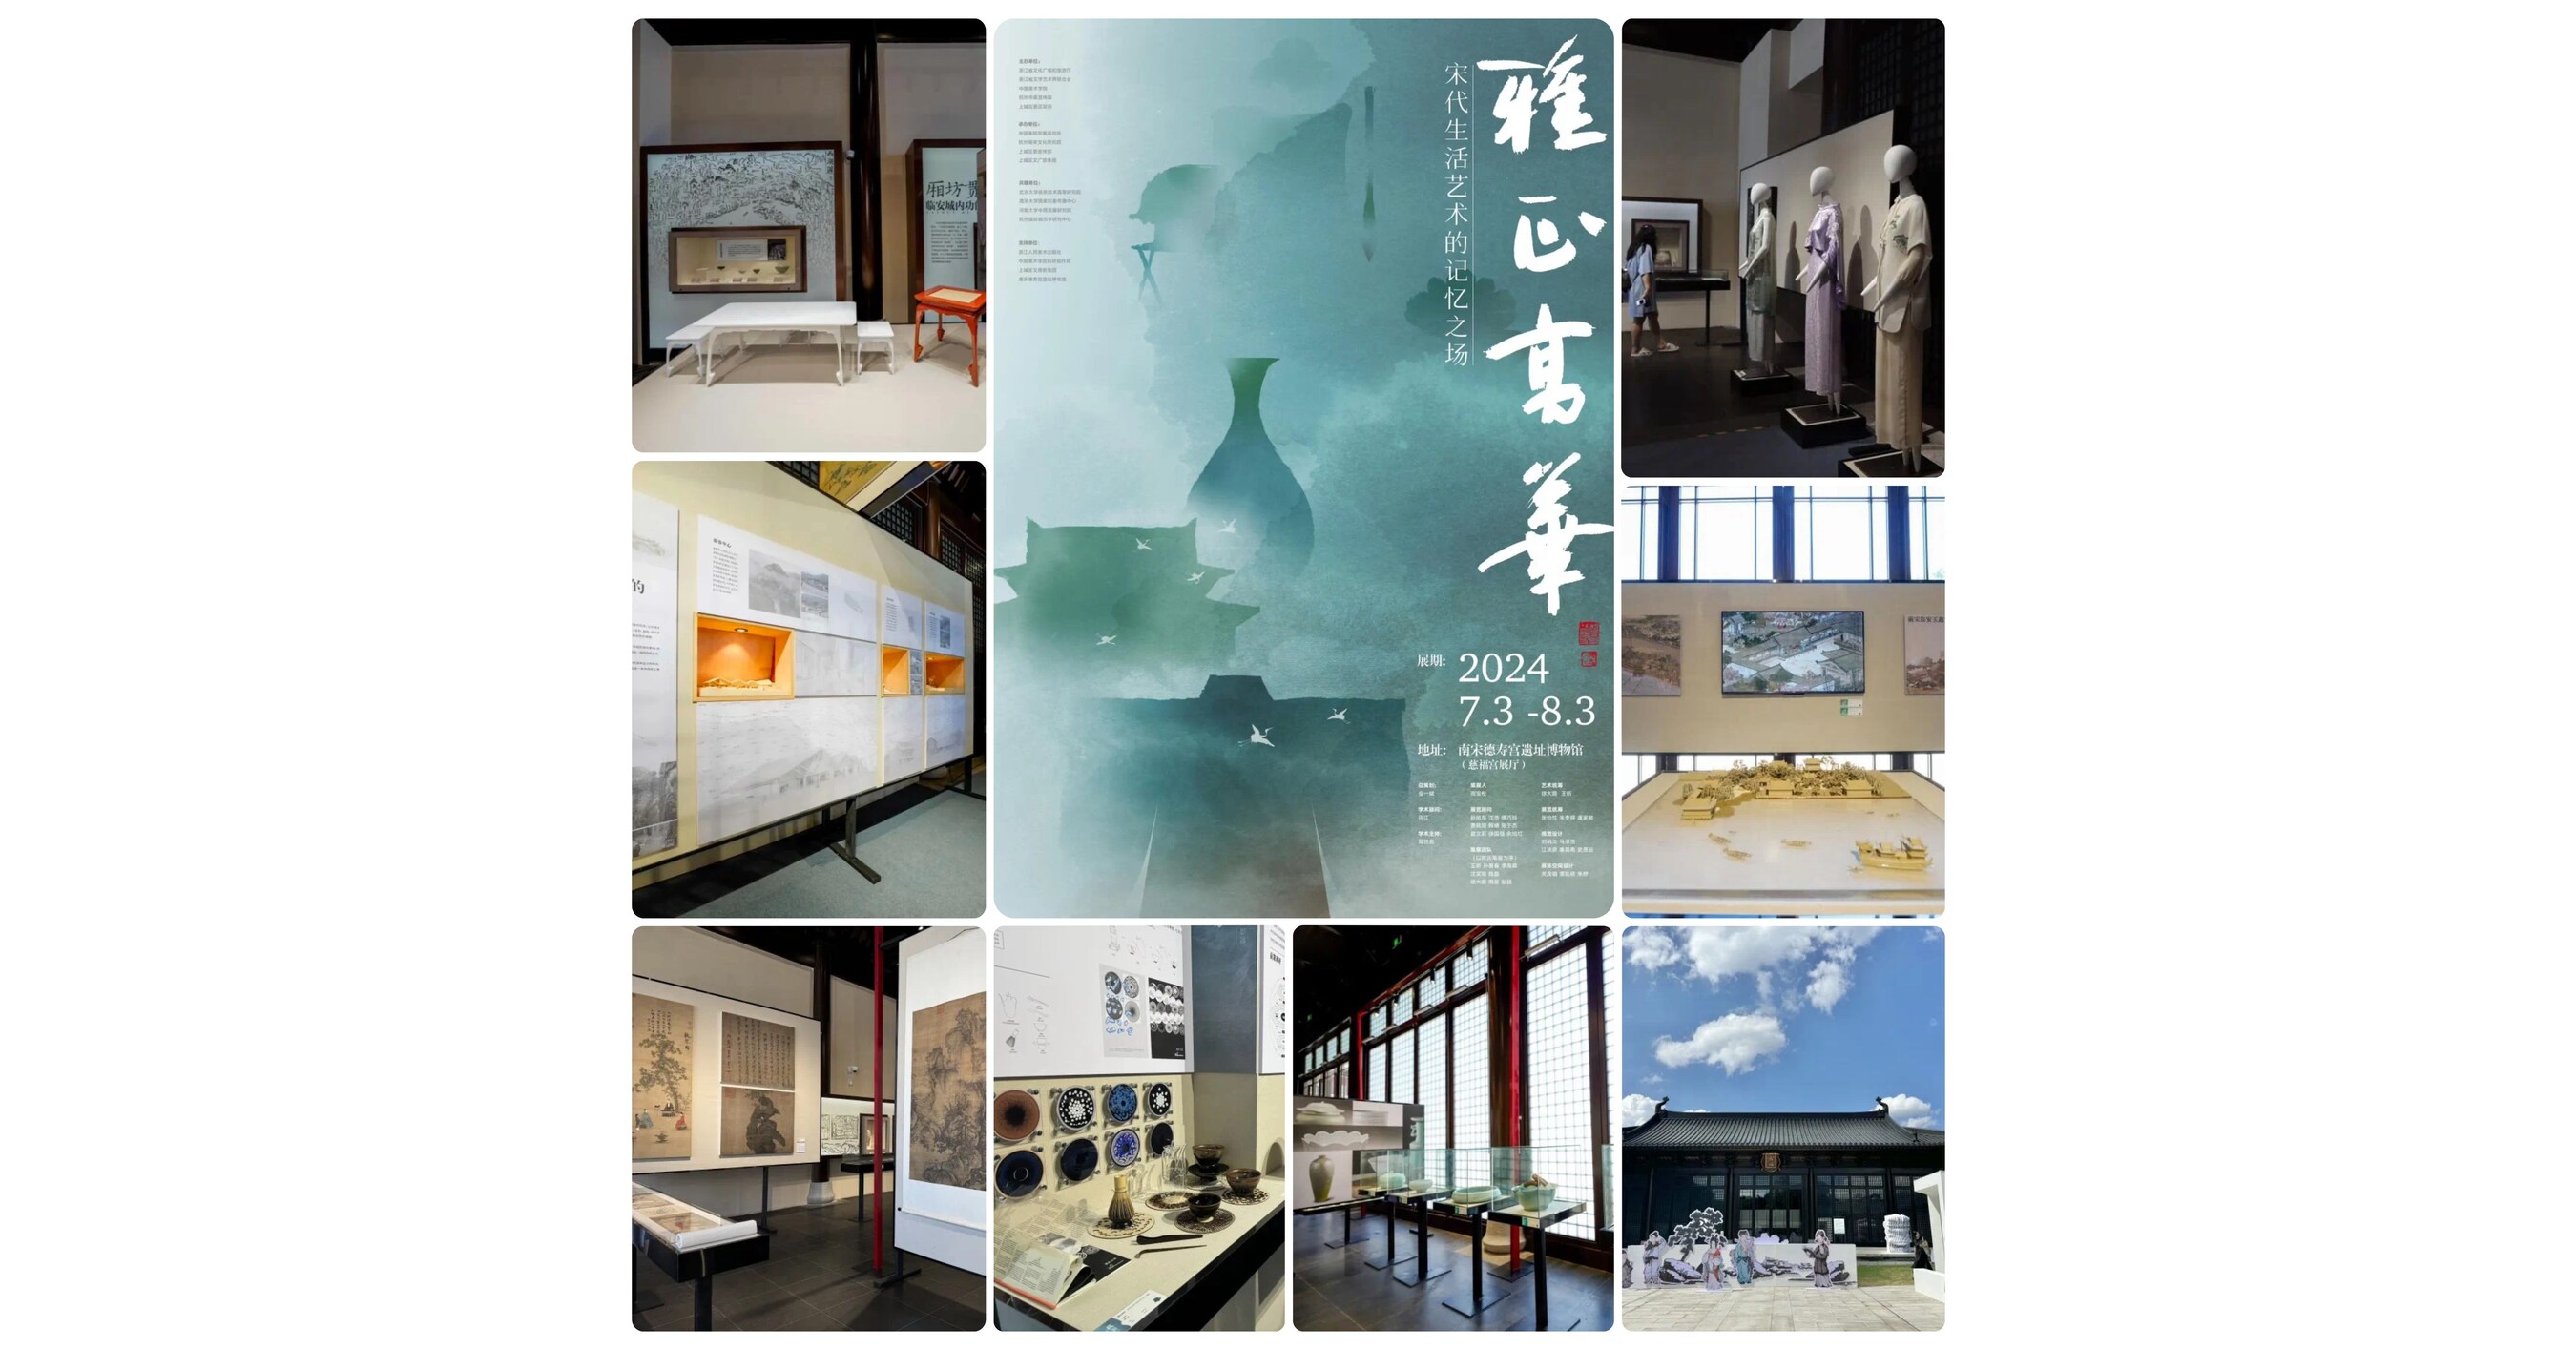 Exhibition exploring the aesthetics of the Song style “Memory of the artistic life of the Song Dynasty” opens